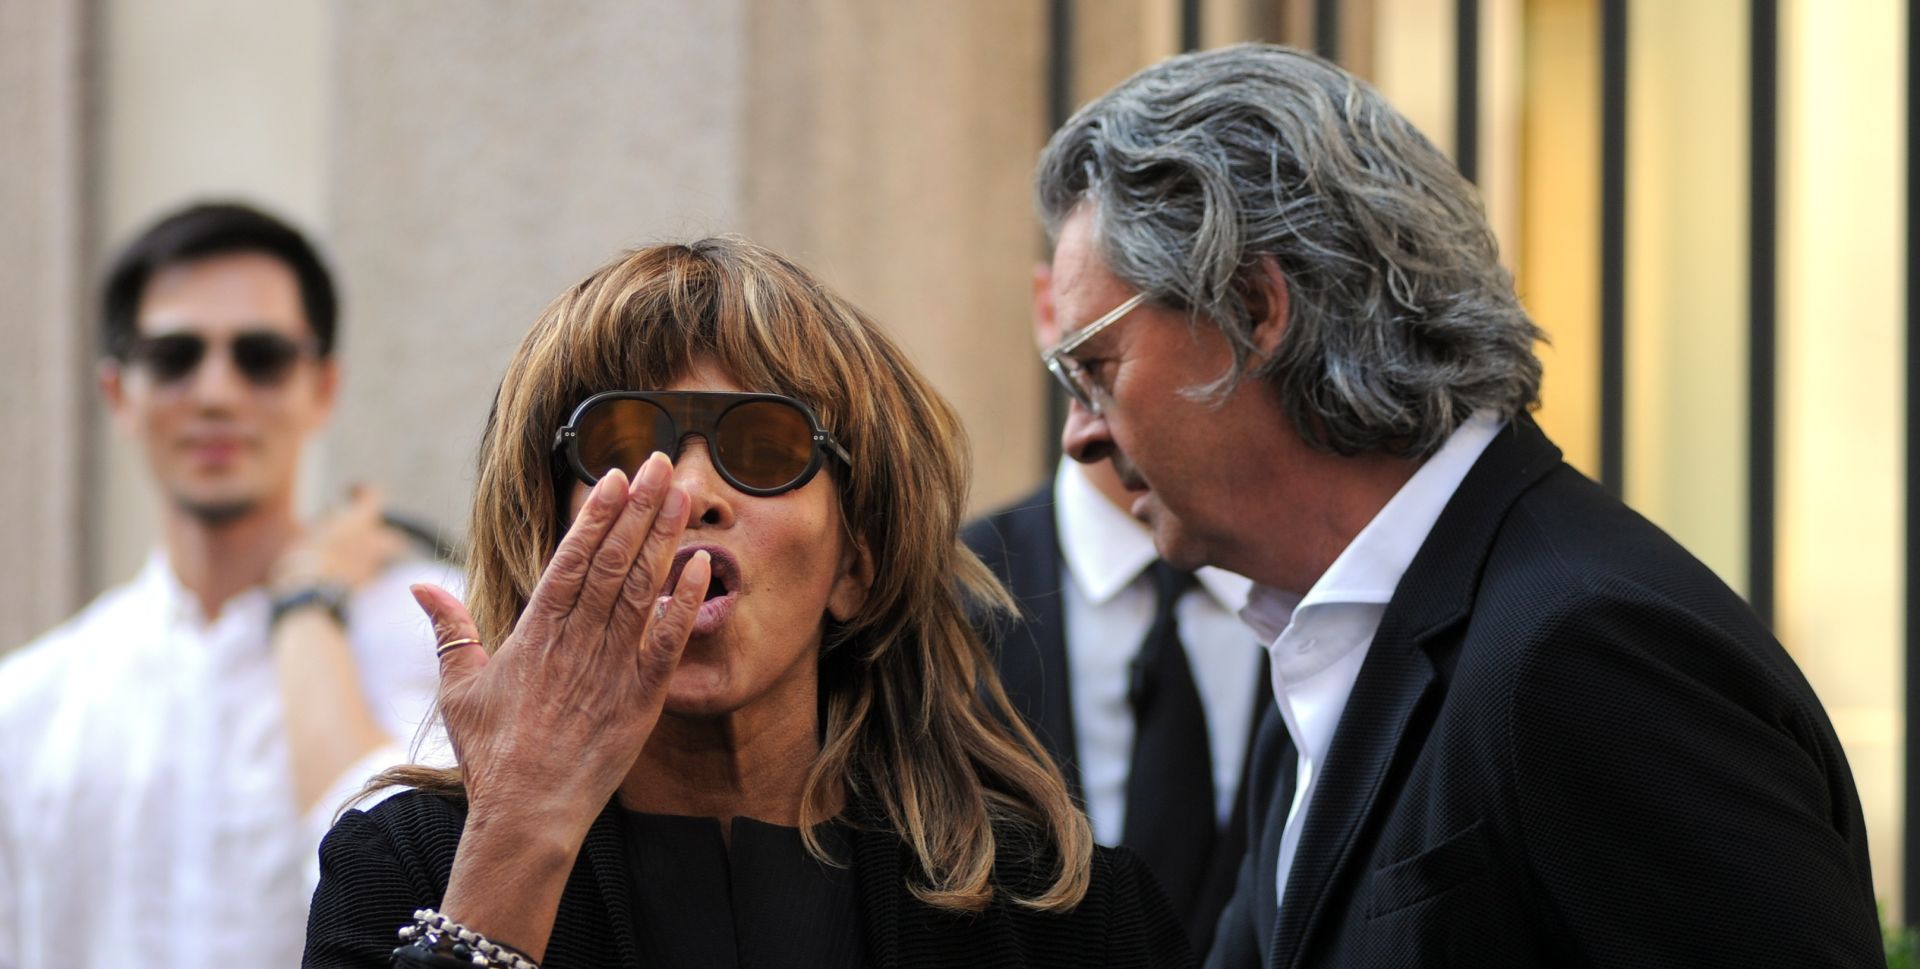 ** Minumum WEB USAGE FEE ** Milan, Tina Turner and her husband shopping Armani * minumum WEB USAGE FEE * Milan, Tina Turner and her husband Erwin Bach make shopping in the showroom of Armani on Via Montenapoleone, and after more than two hours out together saluting the crowd, then go up in the car and go back to the hotel./IPA/PIXSELLPhoto: IPA/PIXSELL